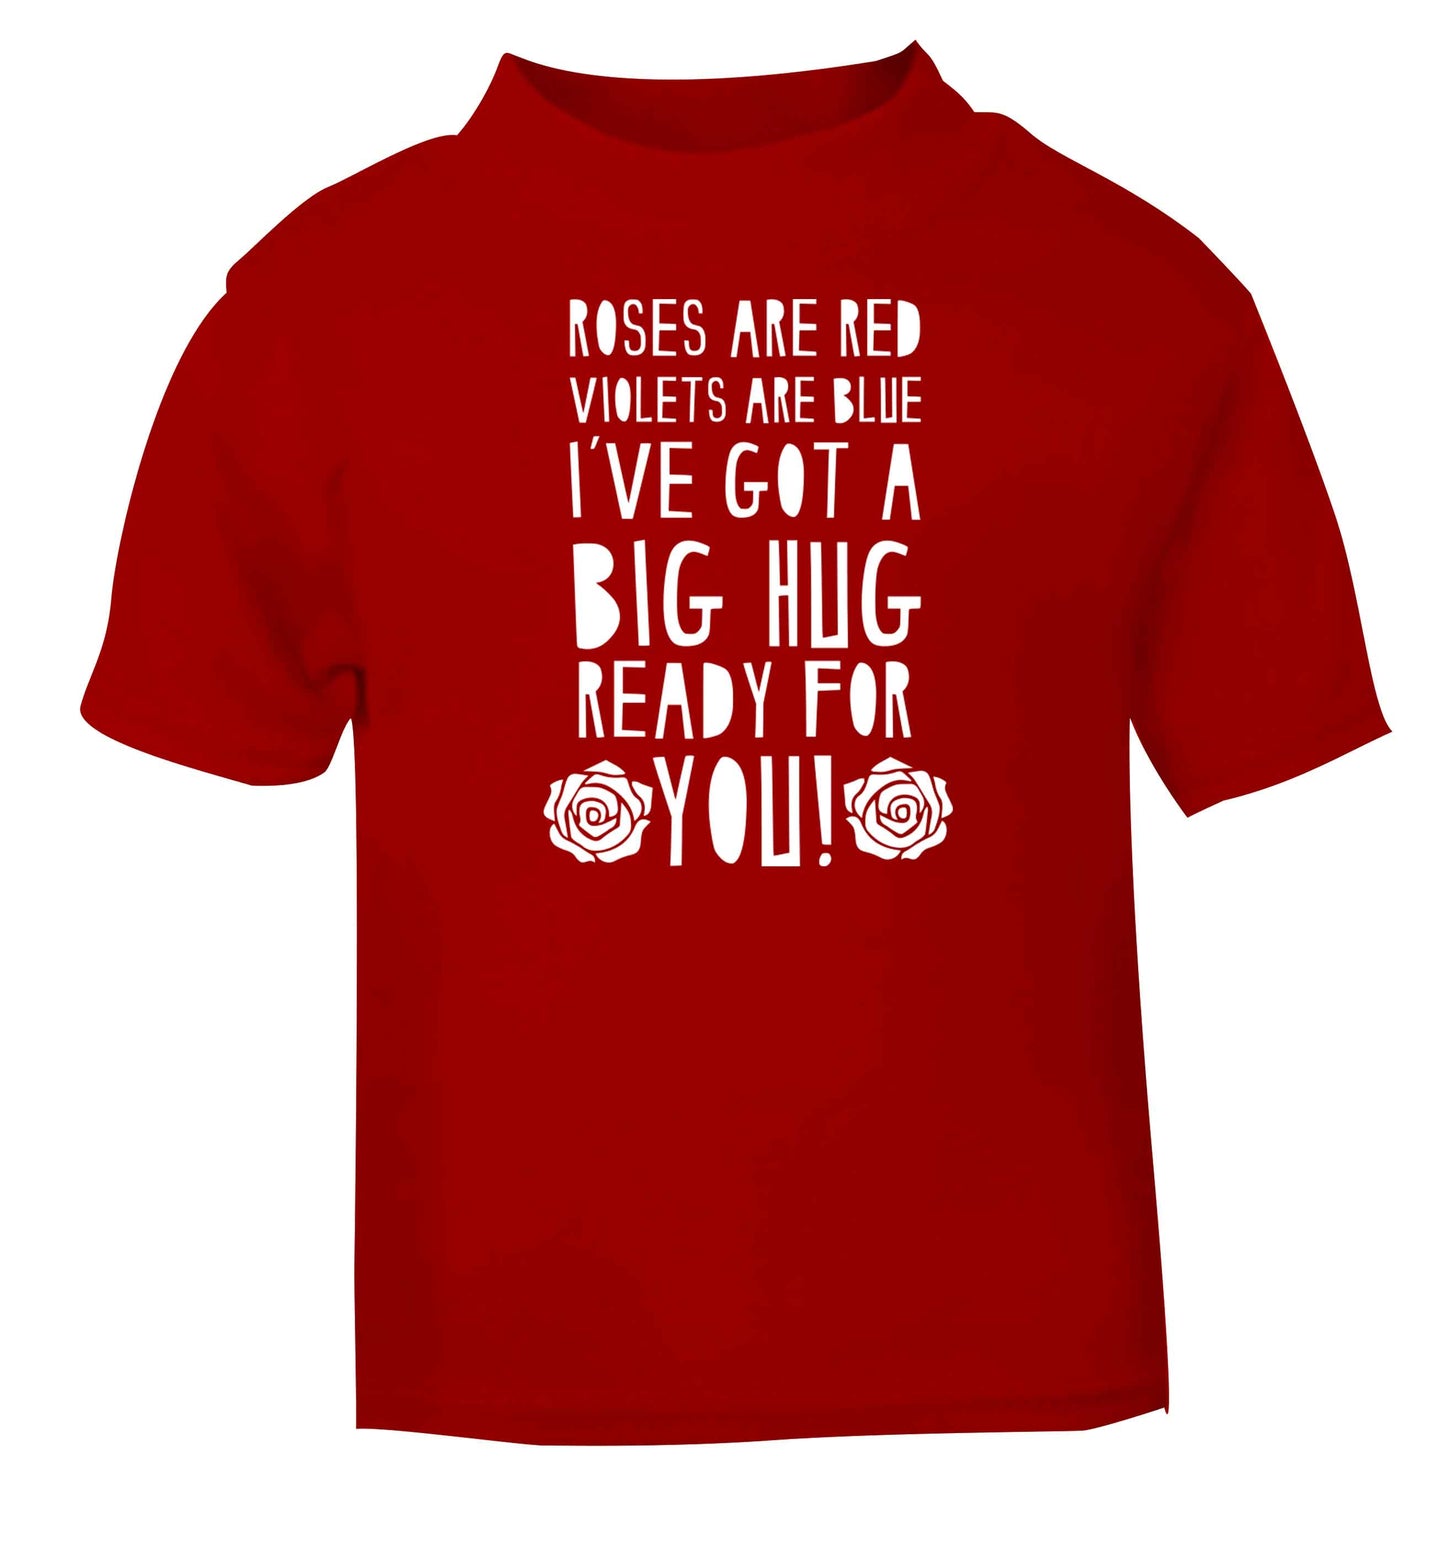 Roses are red violets are blue I've got a big hug coming for you red baby toddler Tshirt 2 Years